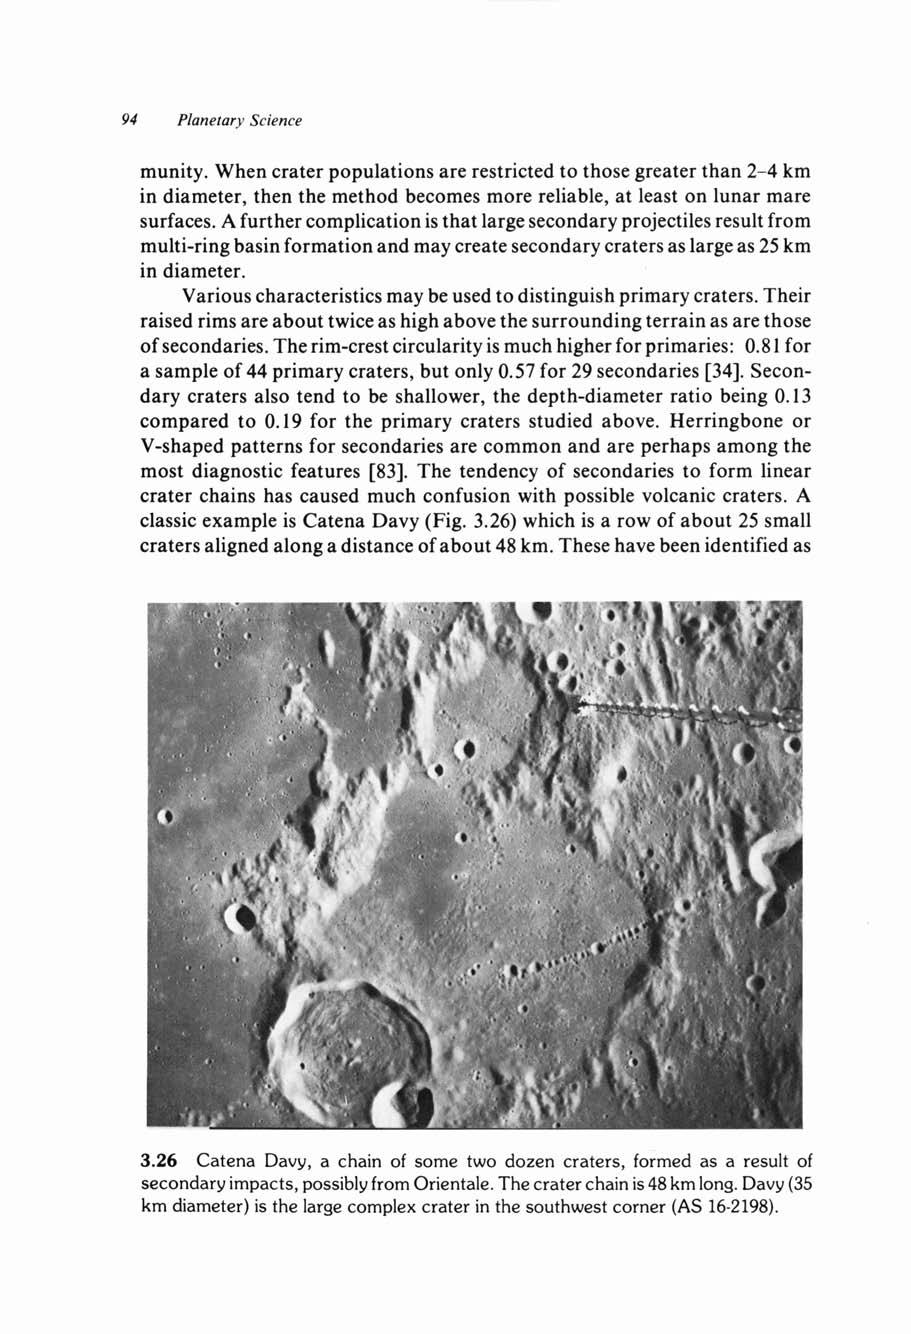 94 Planetary Science munity. When crater populations are restricted to those greater than 2-4 km in diameter, then the method becomes more reliable, at least on lunar mare surfaces.